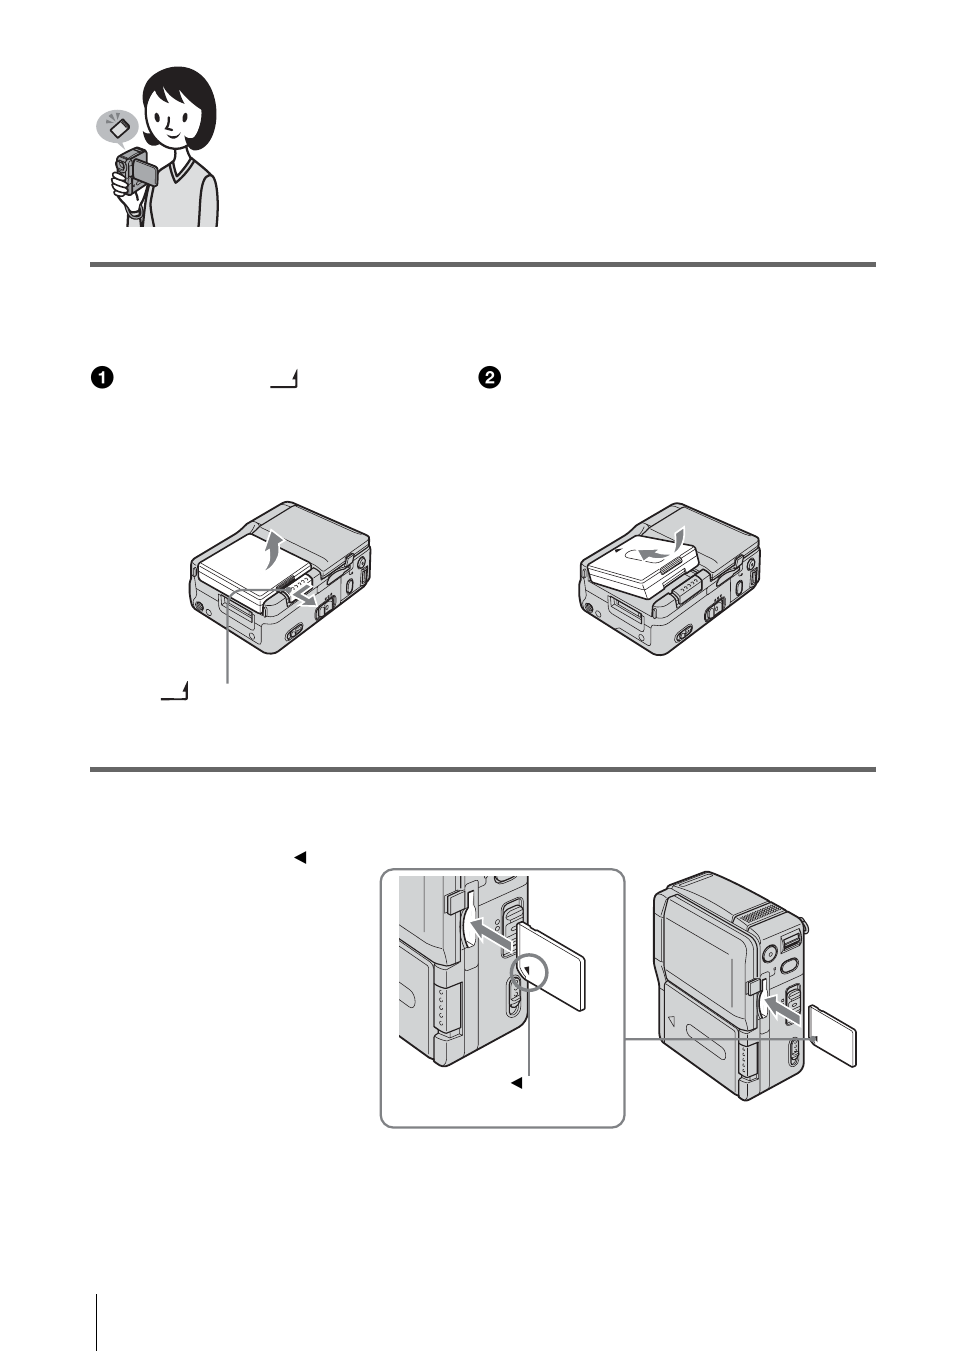 Recording still images on a “memory stick duo | Sony DCR-IP1 User Manual | Page 10 / 116